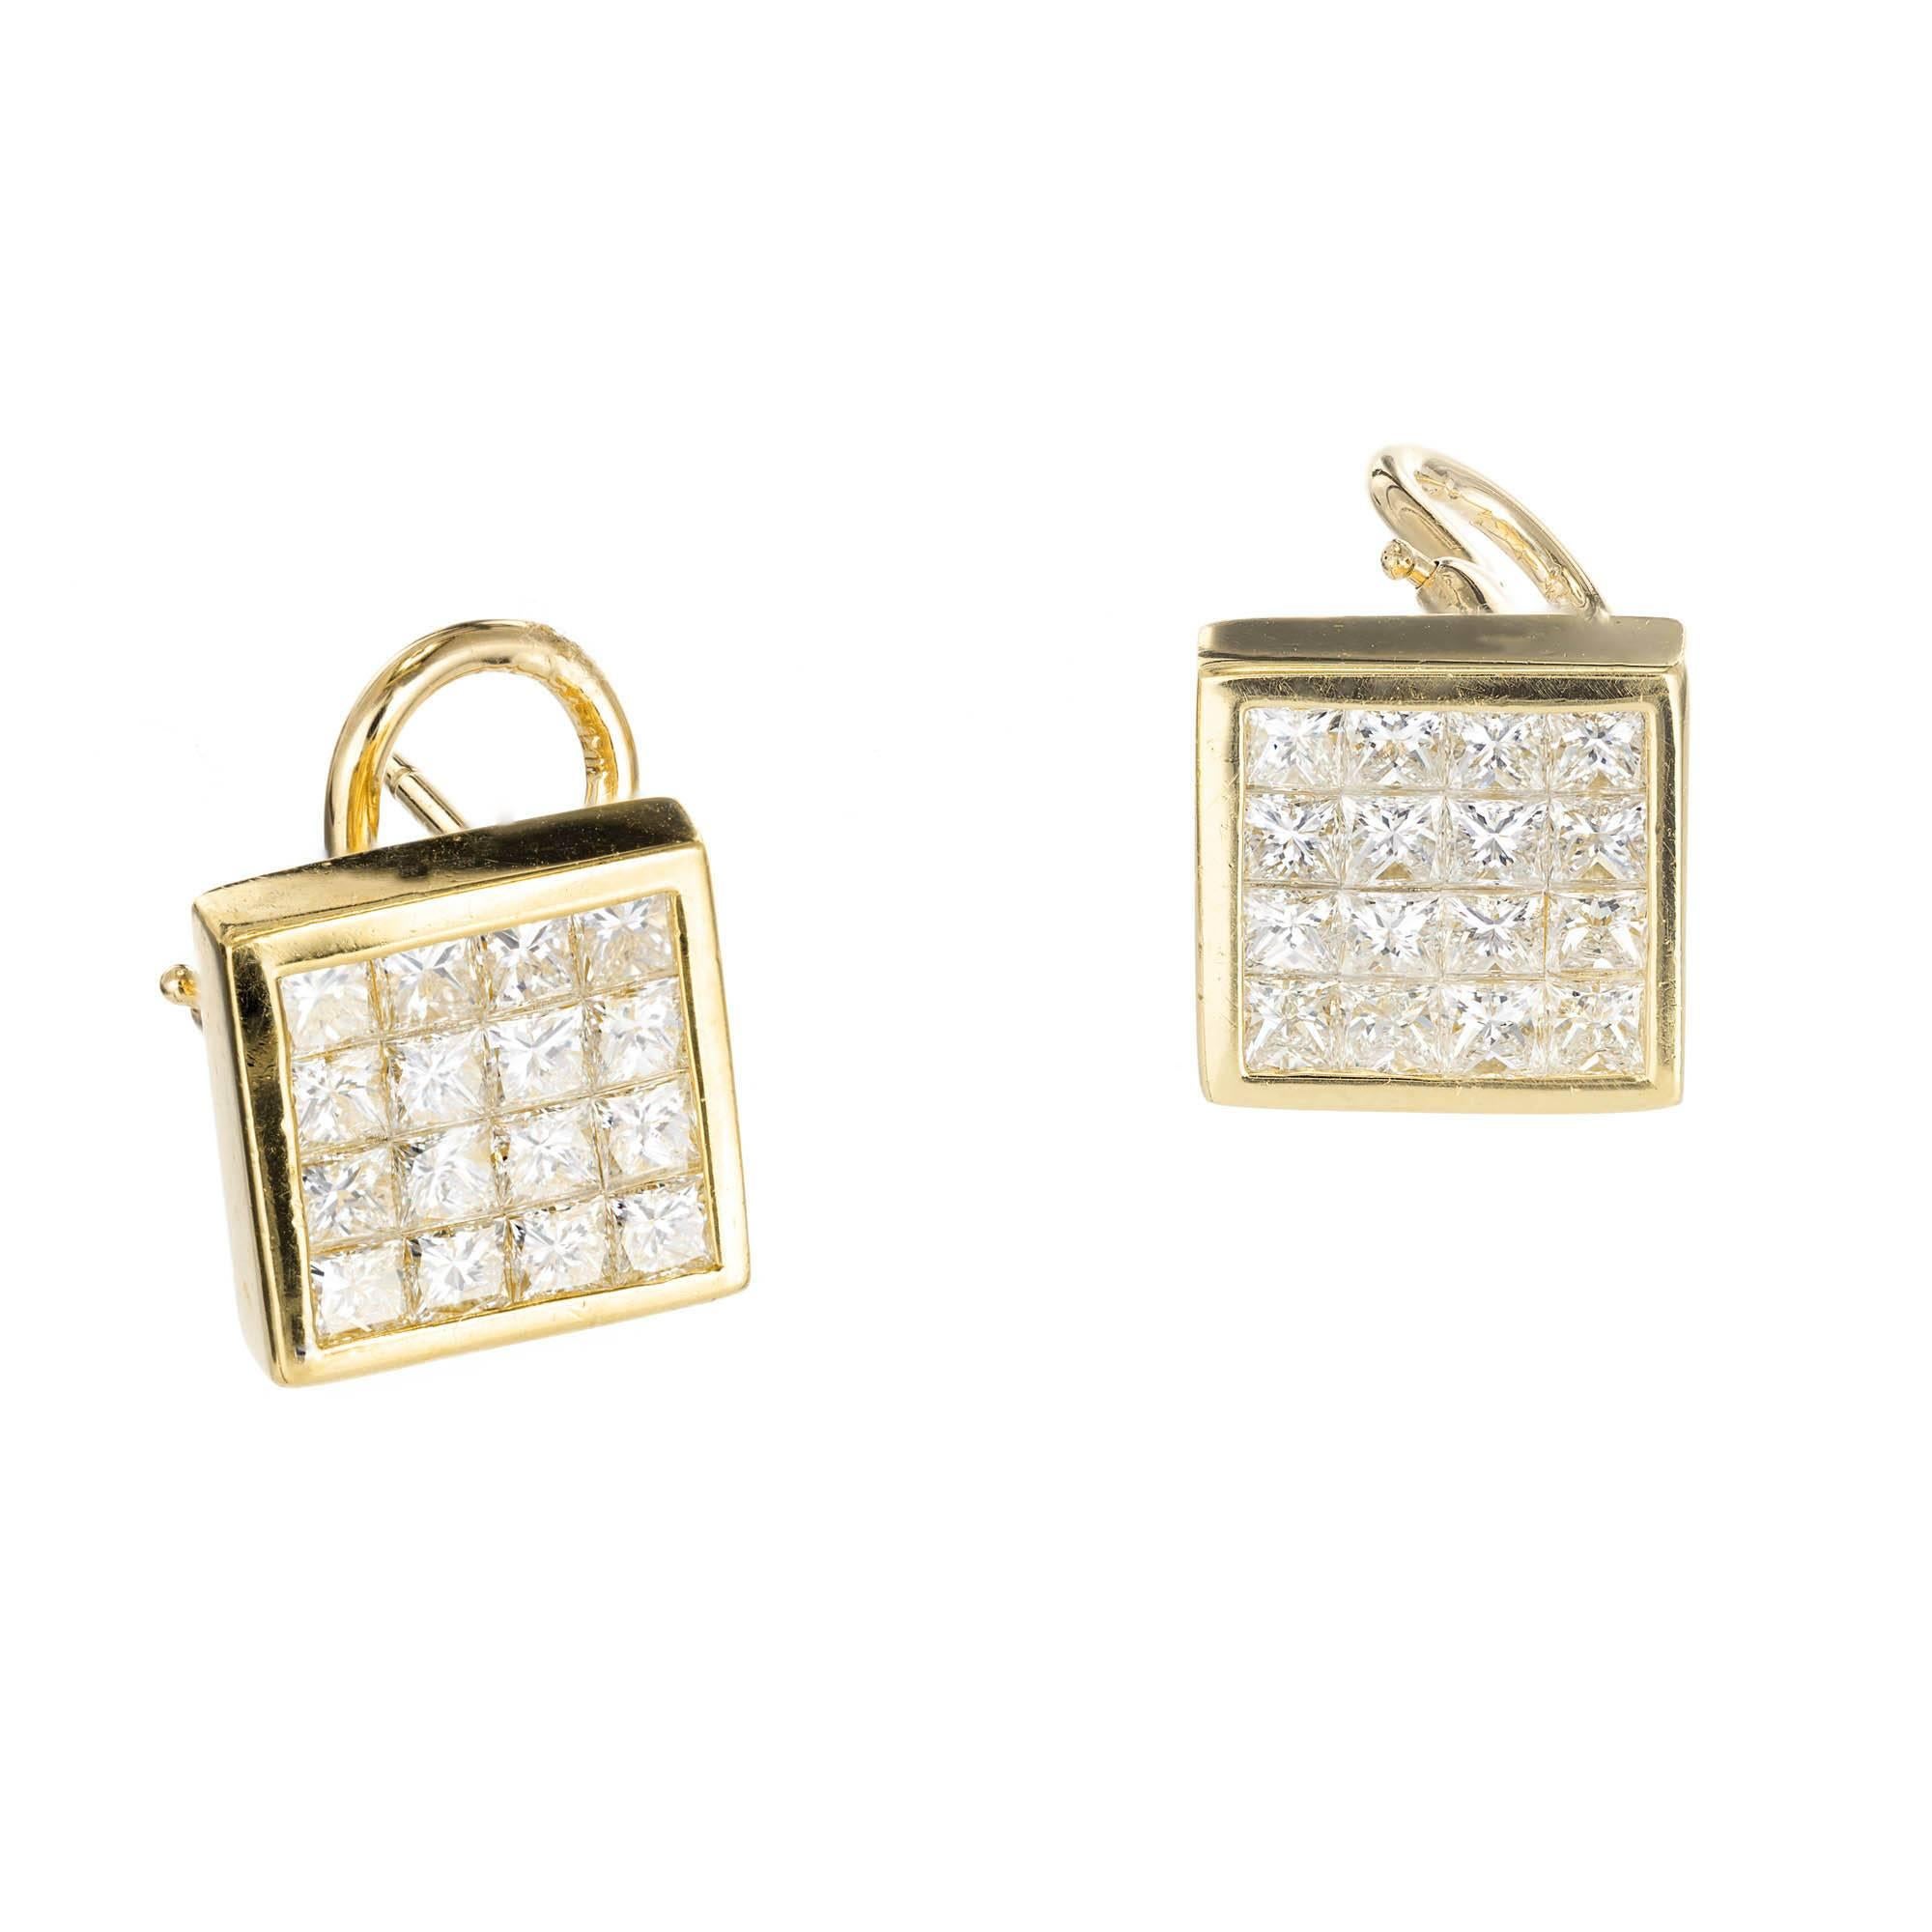 Classic flat invisible set Princess cut clip post diamond stud earrings with bright white sparkle, in 18k yellow gold. Lay flat and secure on the ear.

32 Princess cut diamonds, approx. total weight 2.77cts, F, VS2, 2.21 x 2.21
18k yellow gold
7.6